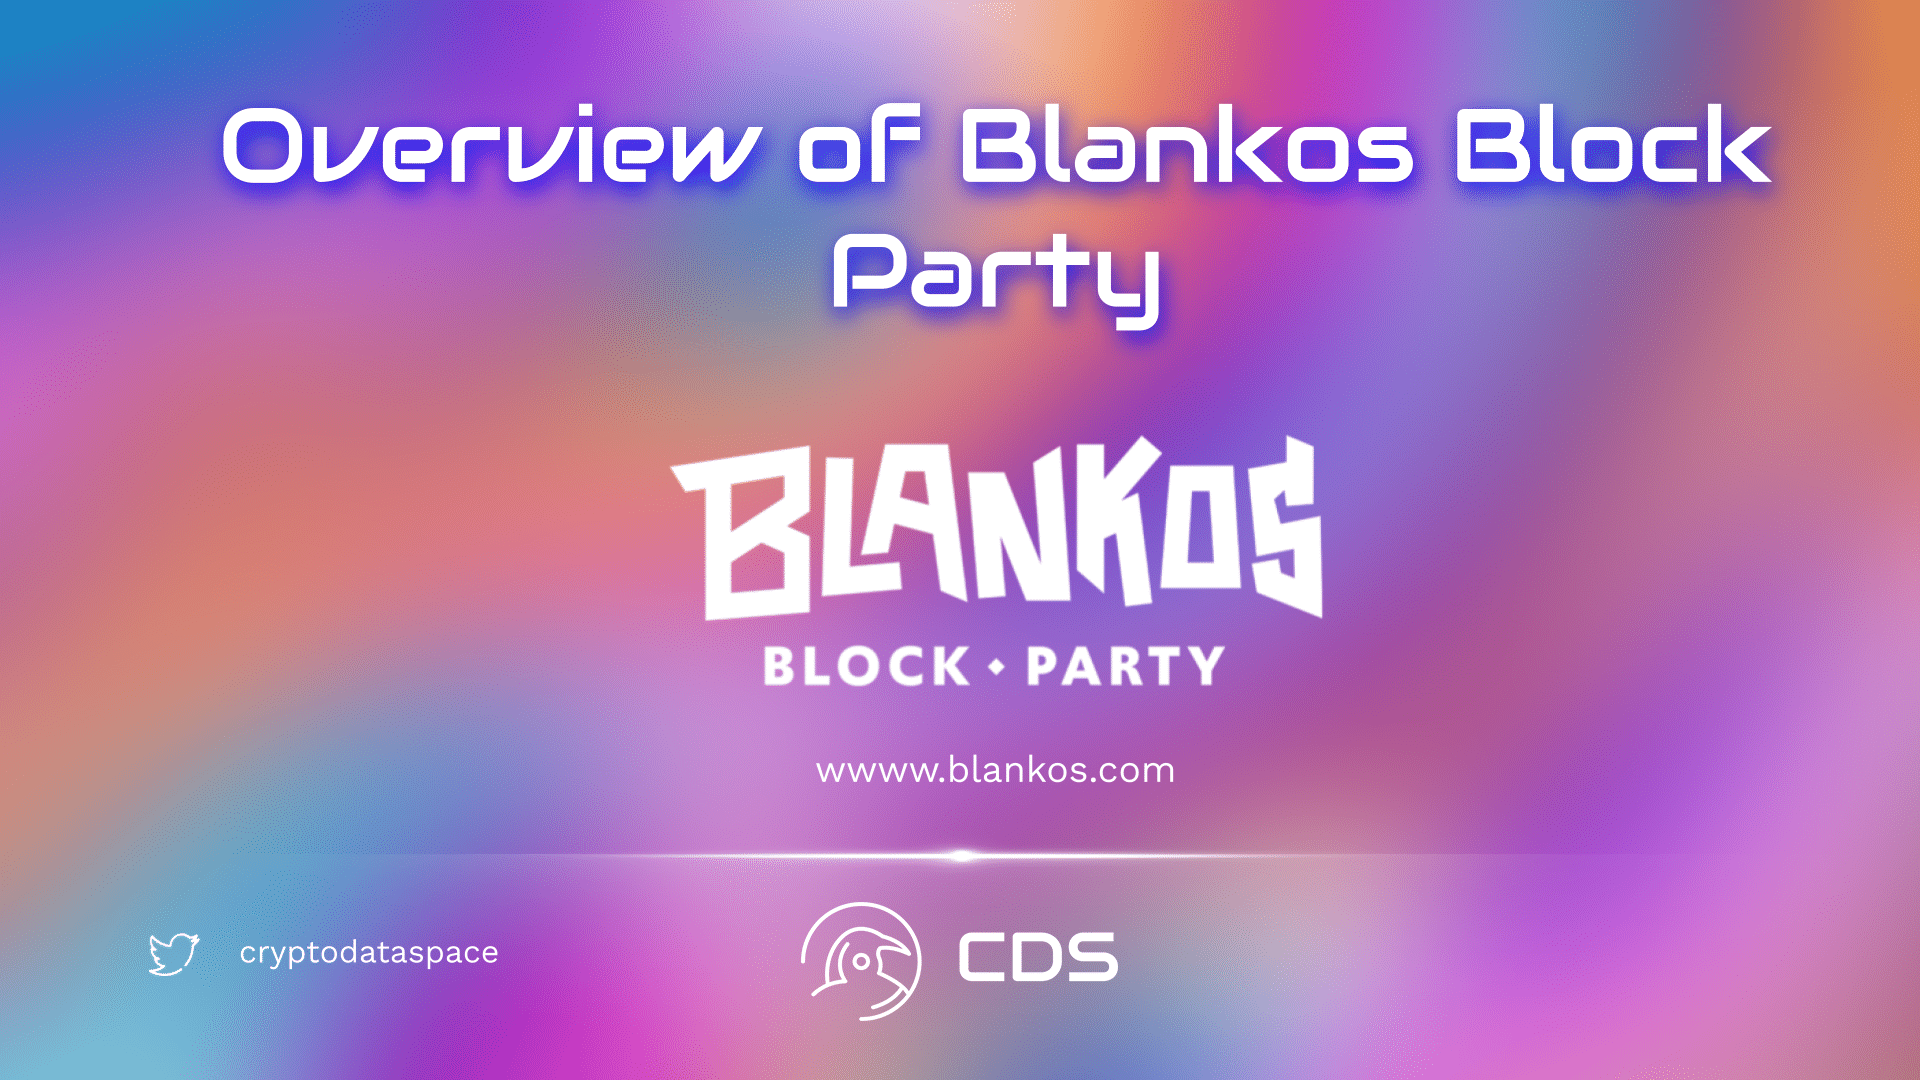 Overview of Blankos Block Party